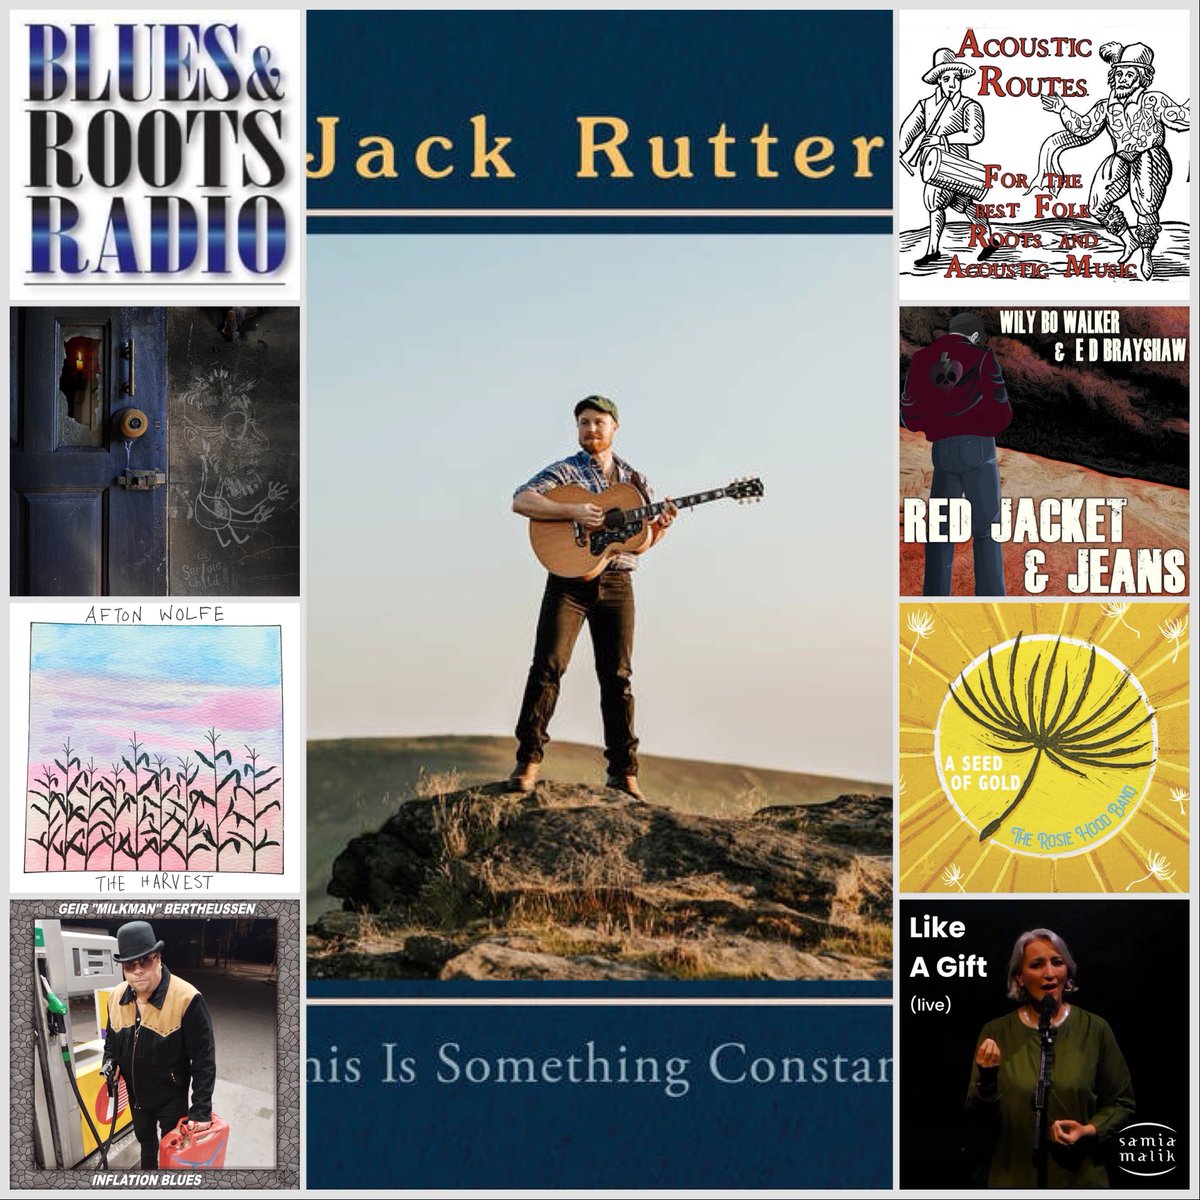 On @AcousticRoutes show 470, #twoinarow from @JackRutterer, tracks from @wilybo @GwilymBowenRhys @HoneyandDaBear @alexbedsmusic @Salts_bouyband @samiamalikmusic @ChildSerious @RosieHood @sienco & @PatSwyddogol & more. tune in to @BluesRootsRadio Thurs 7pm 🇬🇧 time